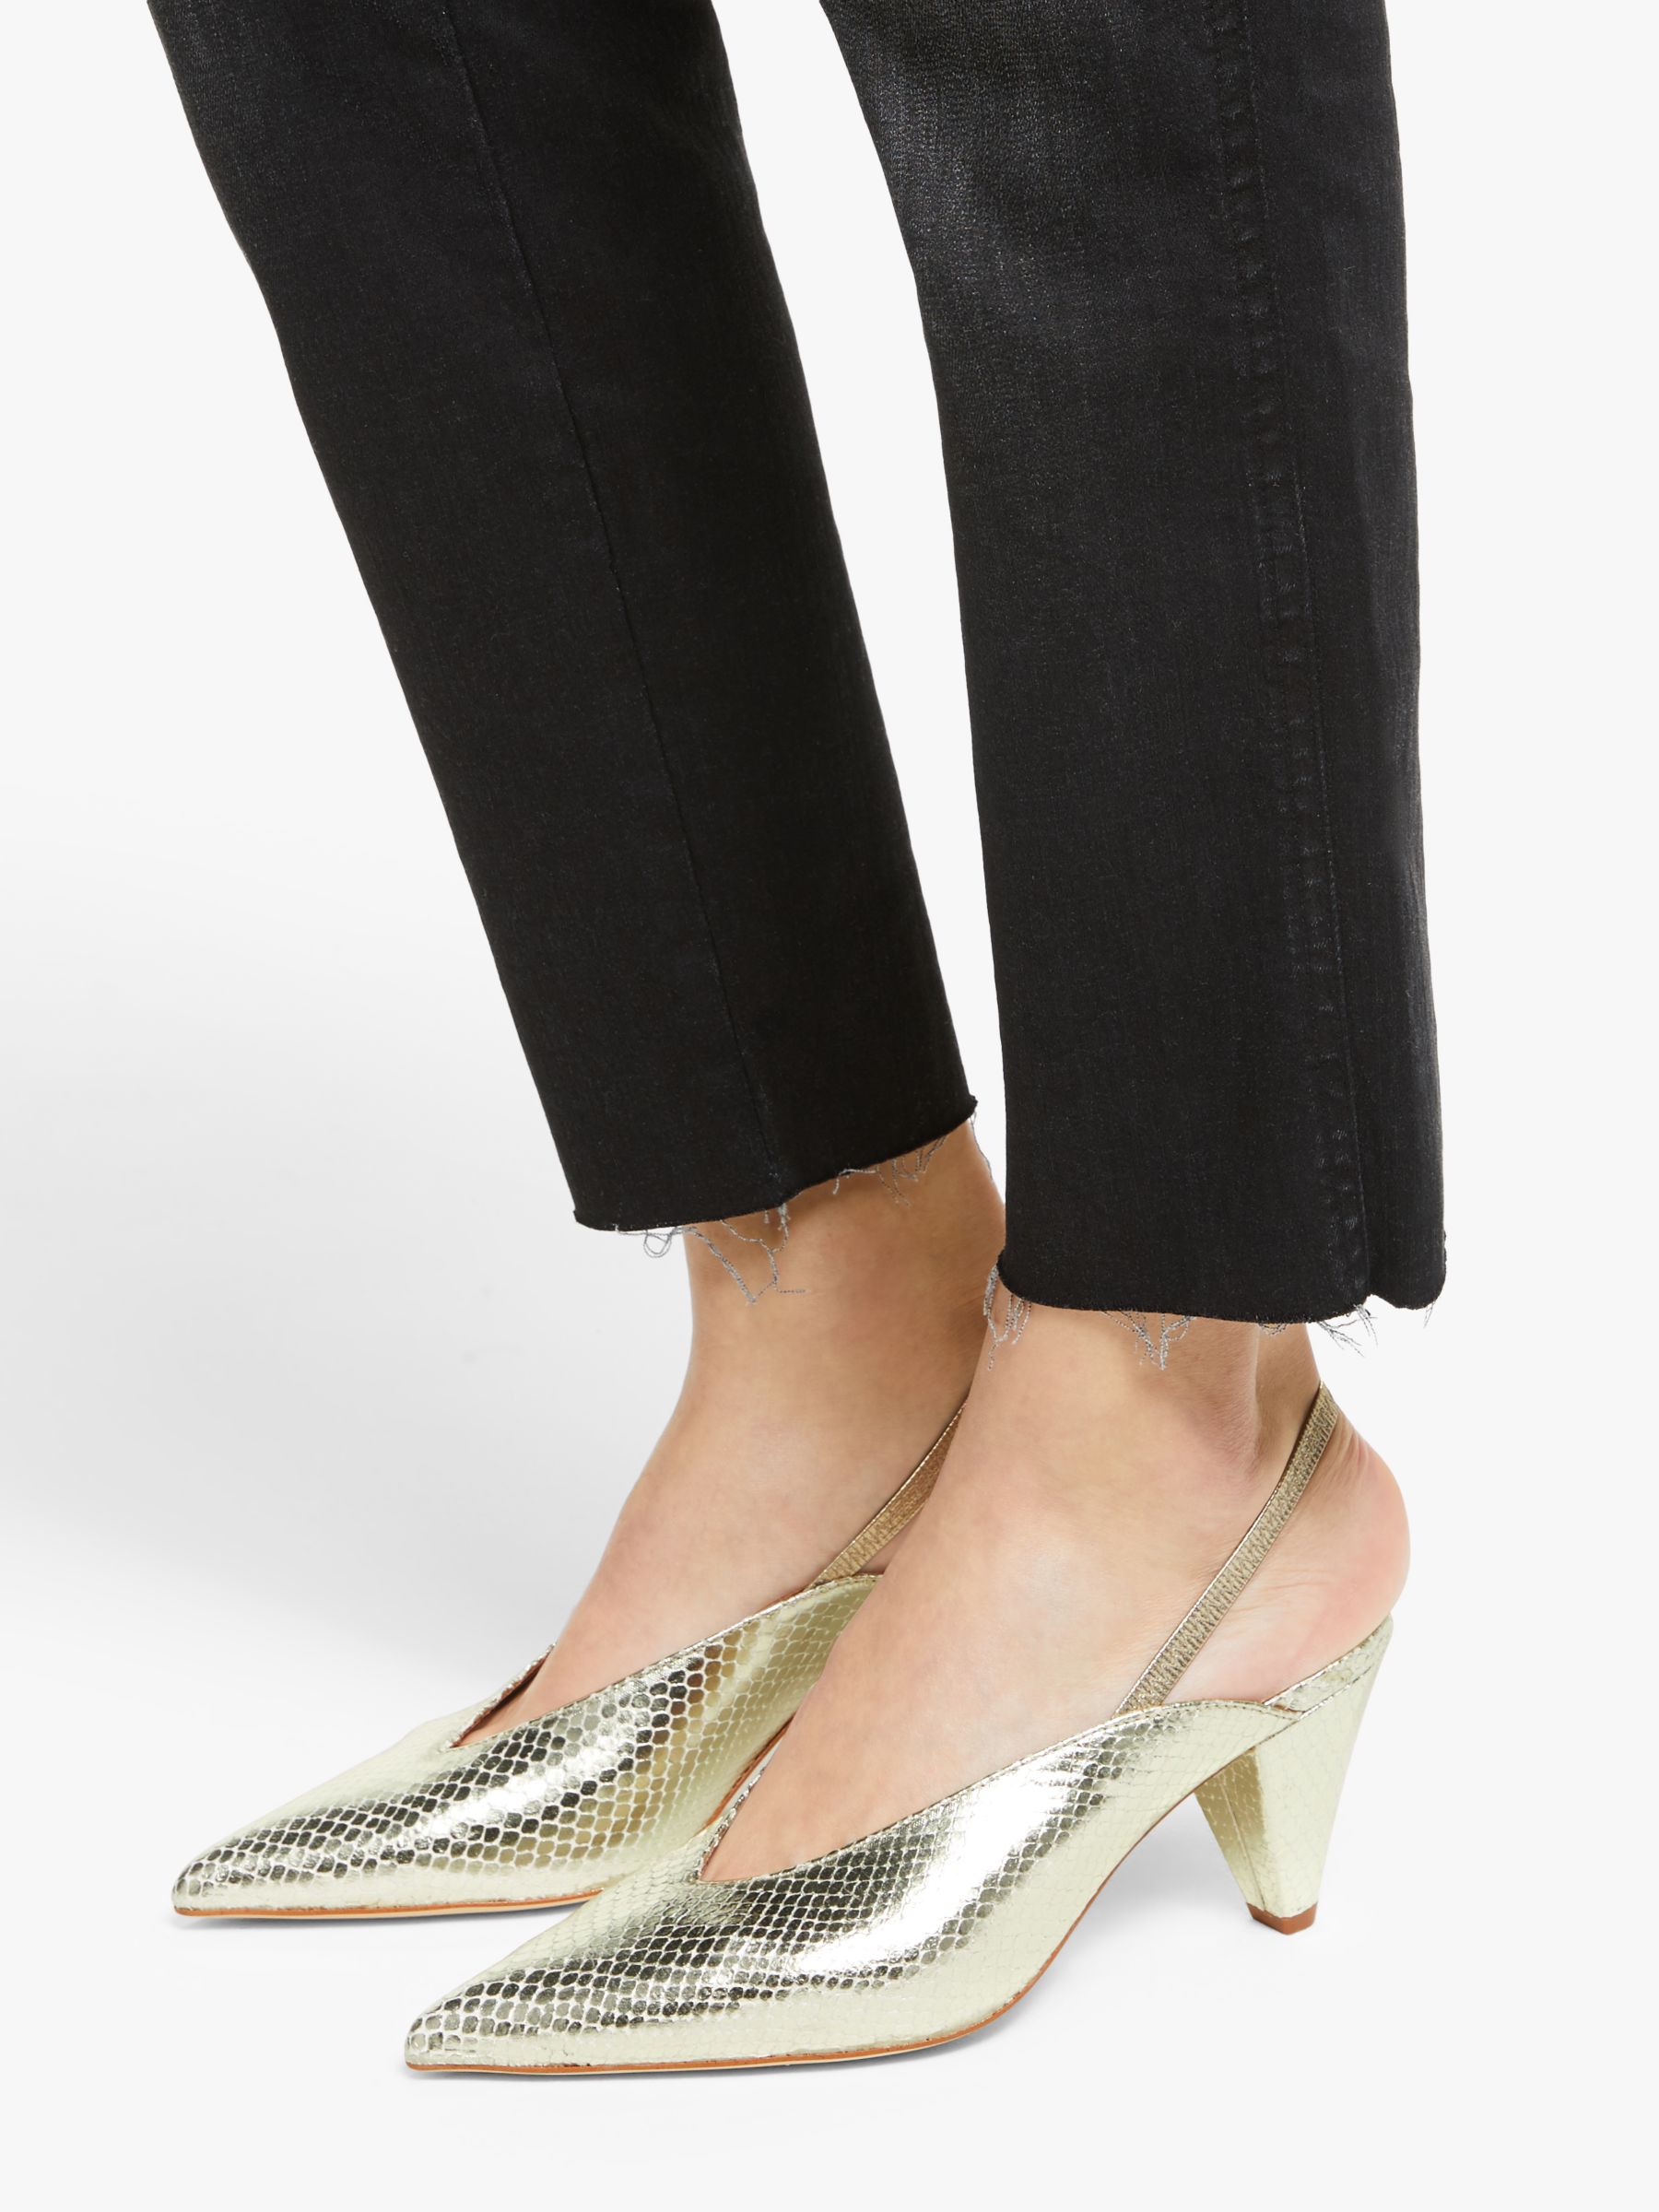 AND/OR Ava Leather Slingback Court Shoes, Gold at John Lewis & Partners